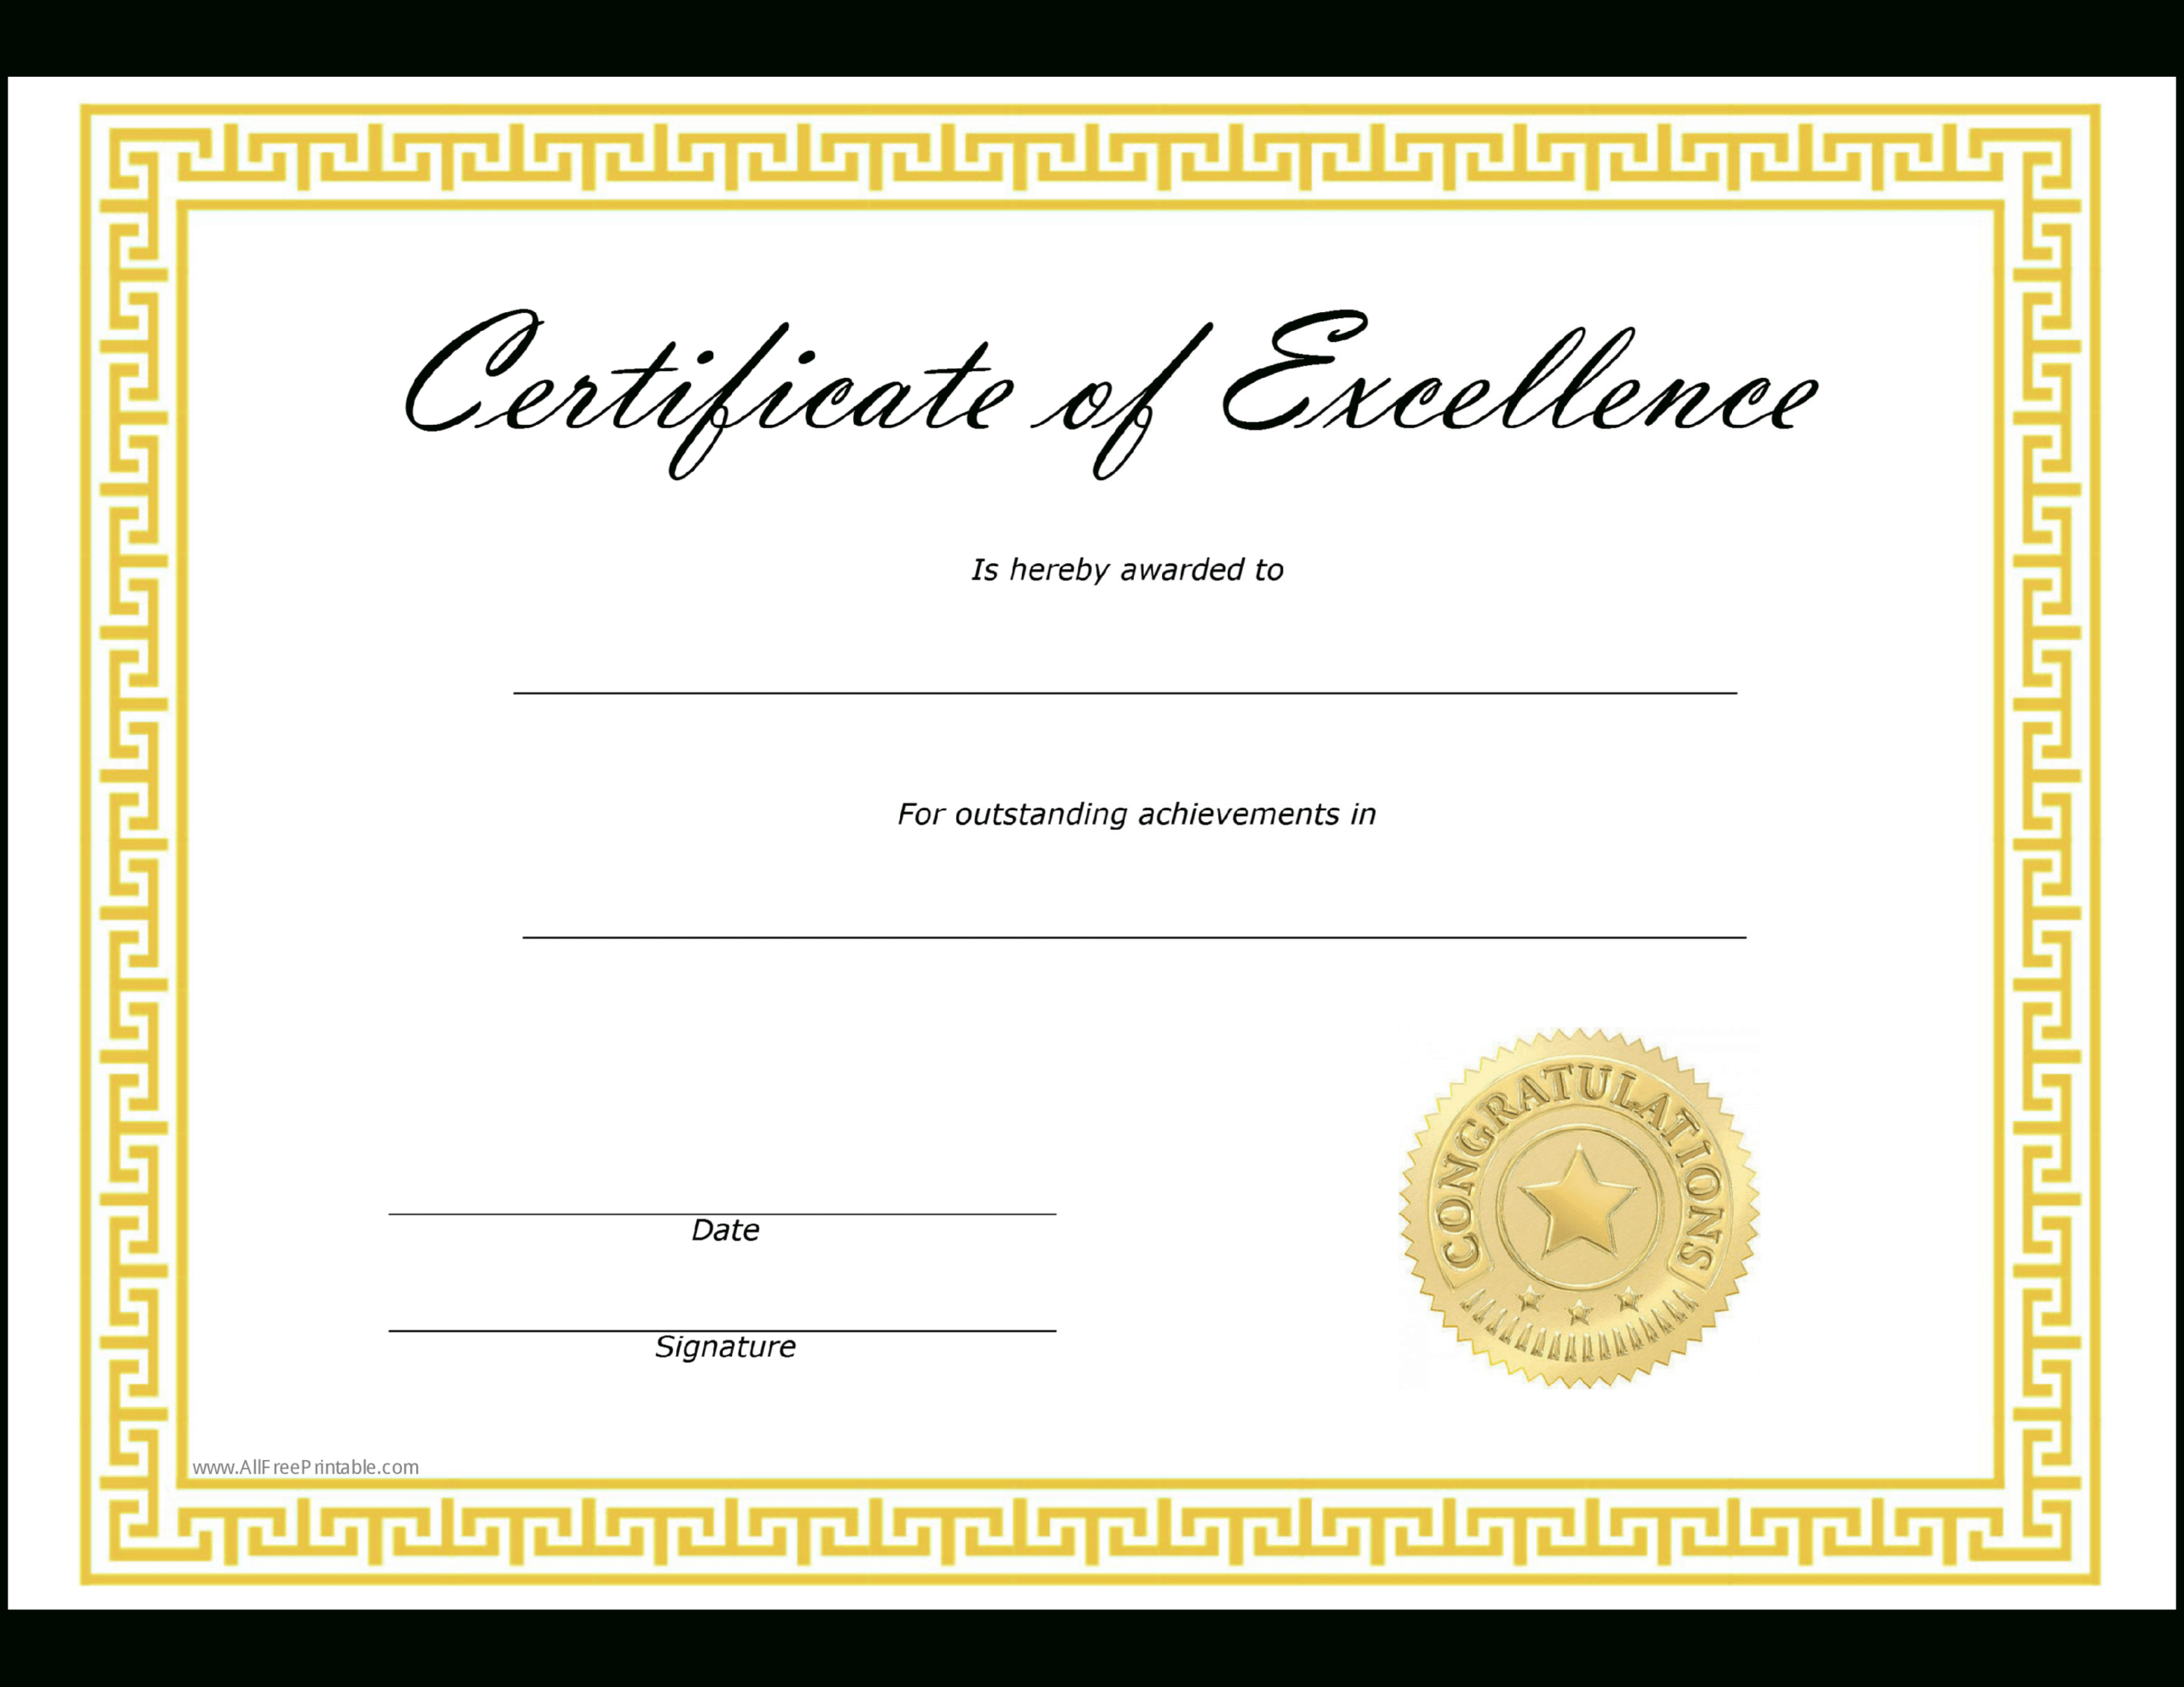 Sample Certificate Of Excellence - Calep.midnightpig.co Throughout Certificate Of Excellence Template Free Download